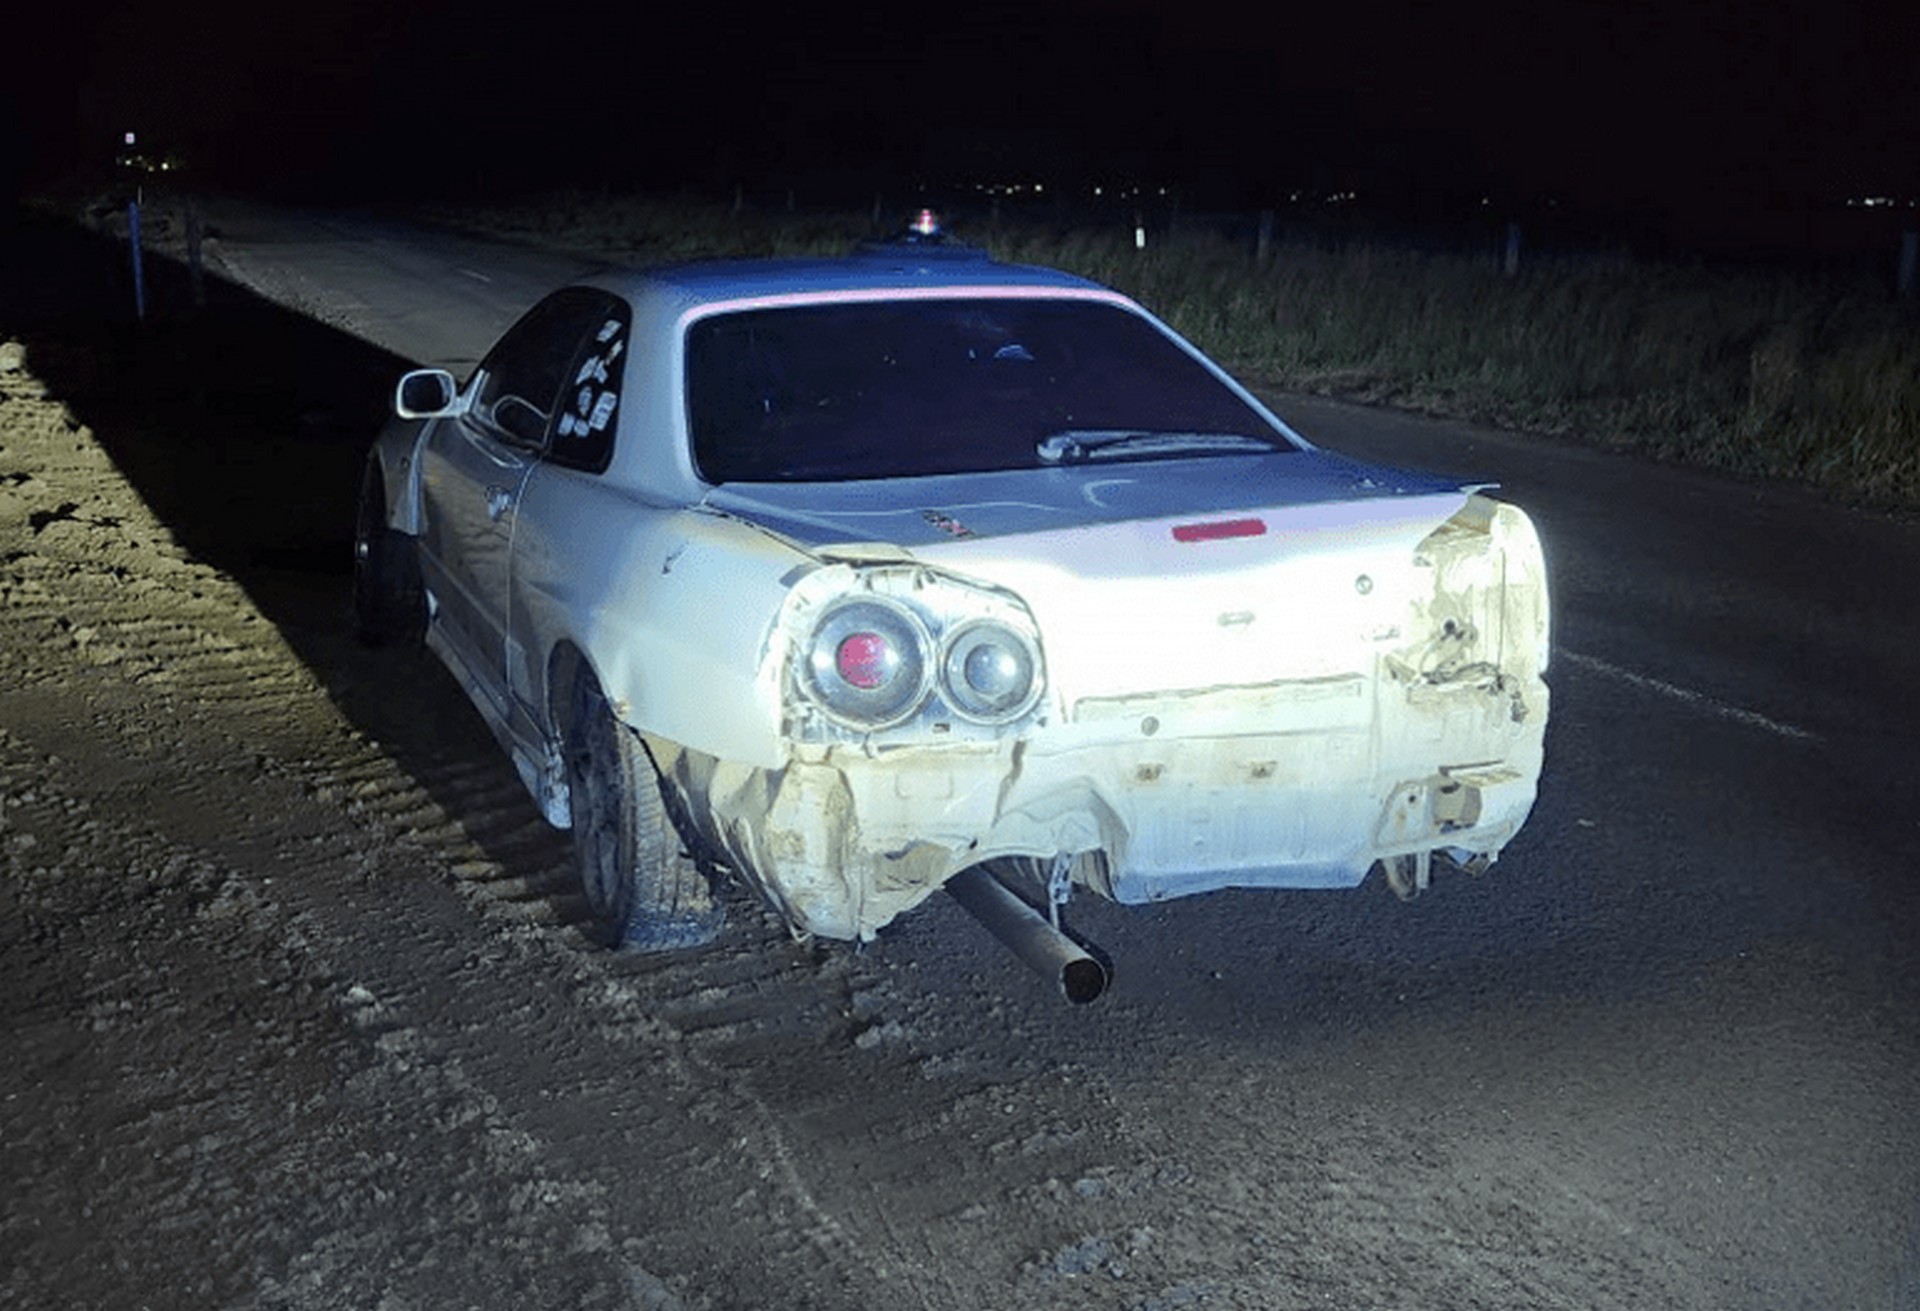 Police Stopped This Dilapidated Nissan Skyline And Quickly Impounded It